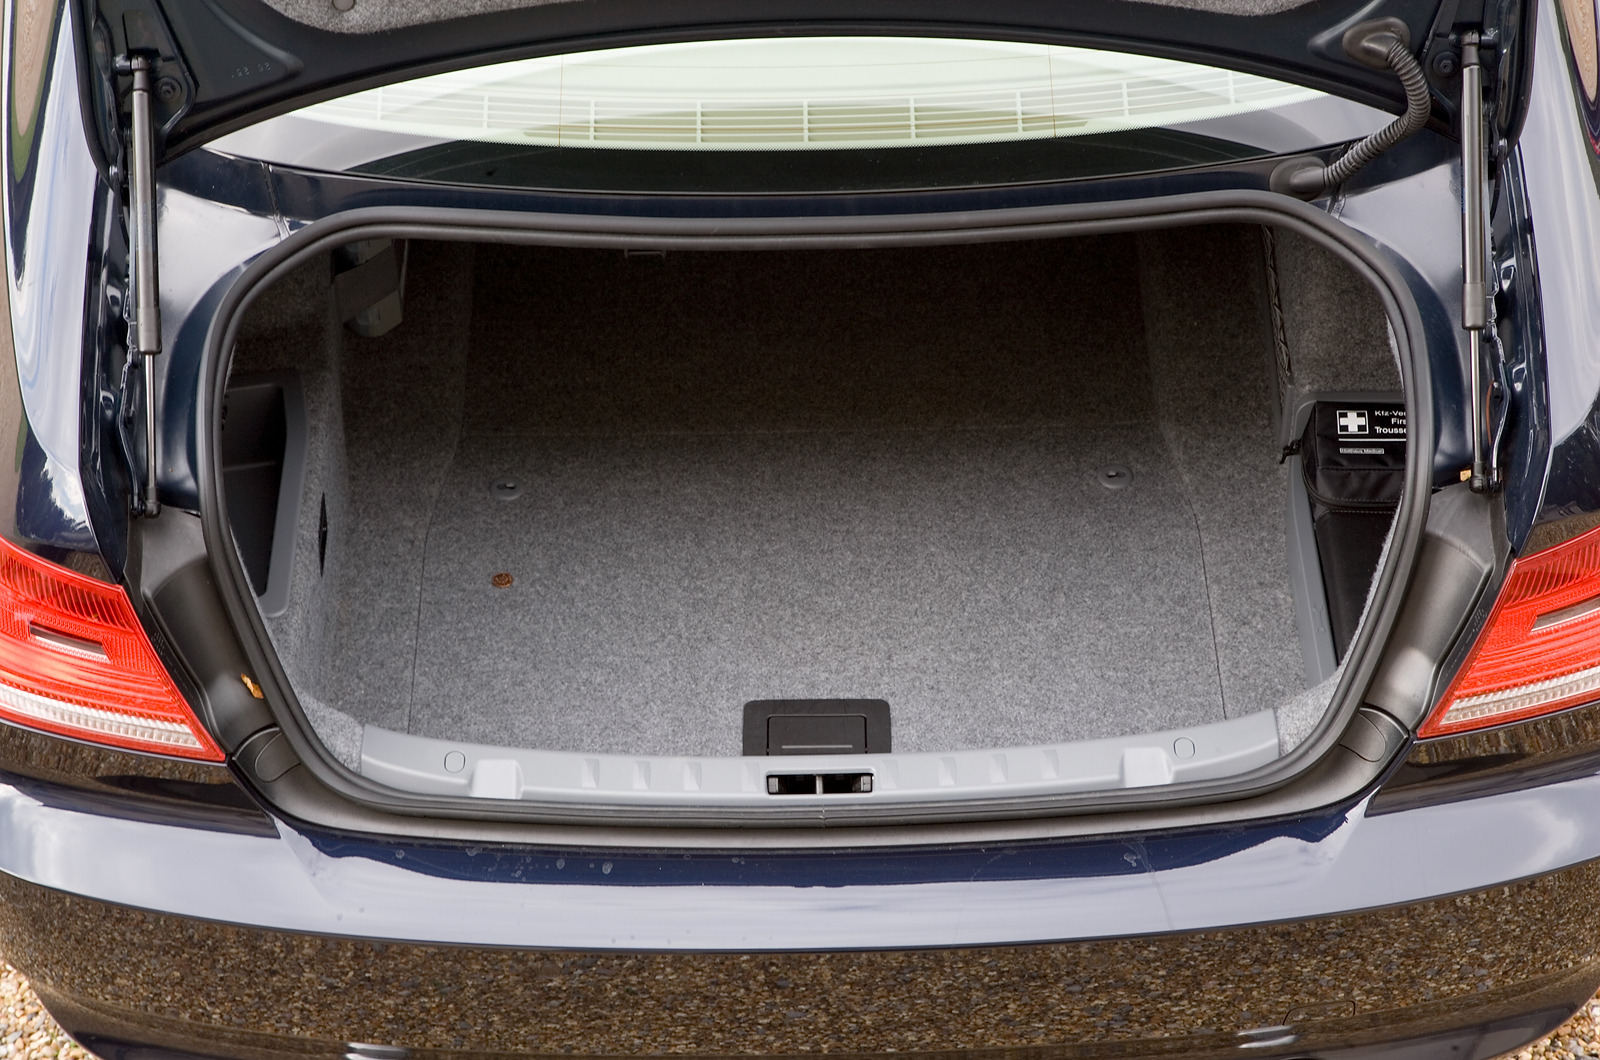 BMW 3 Series Coupé boot space